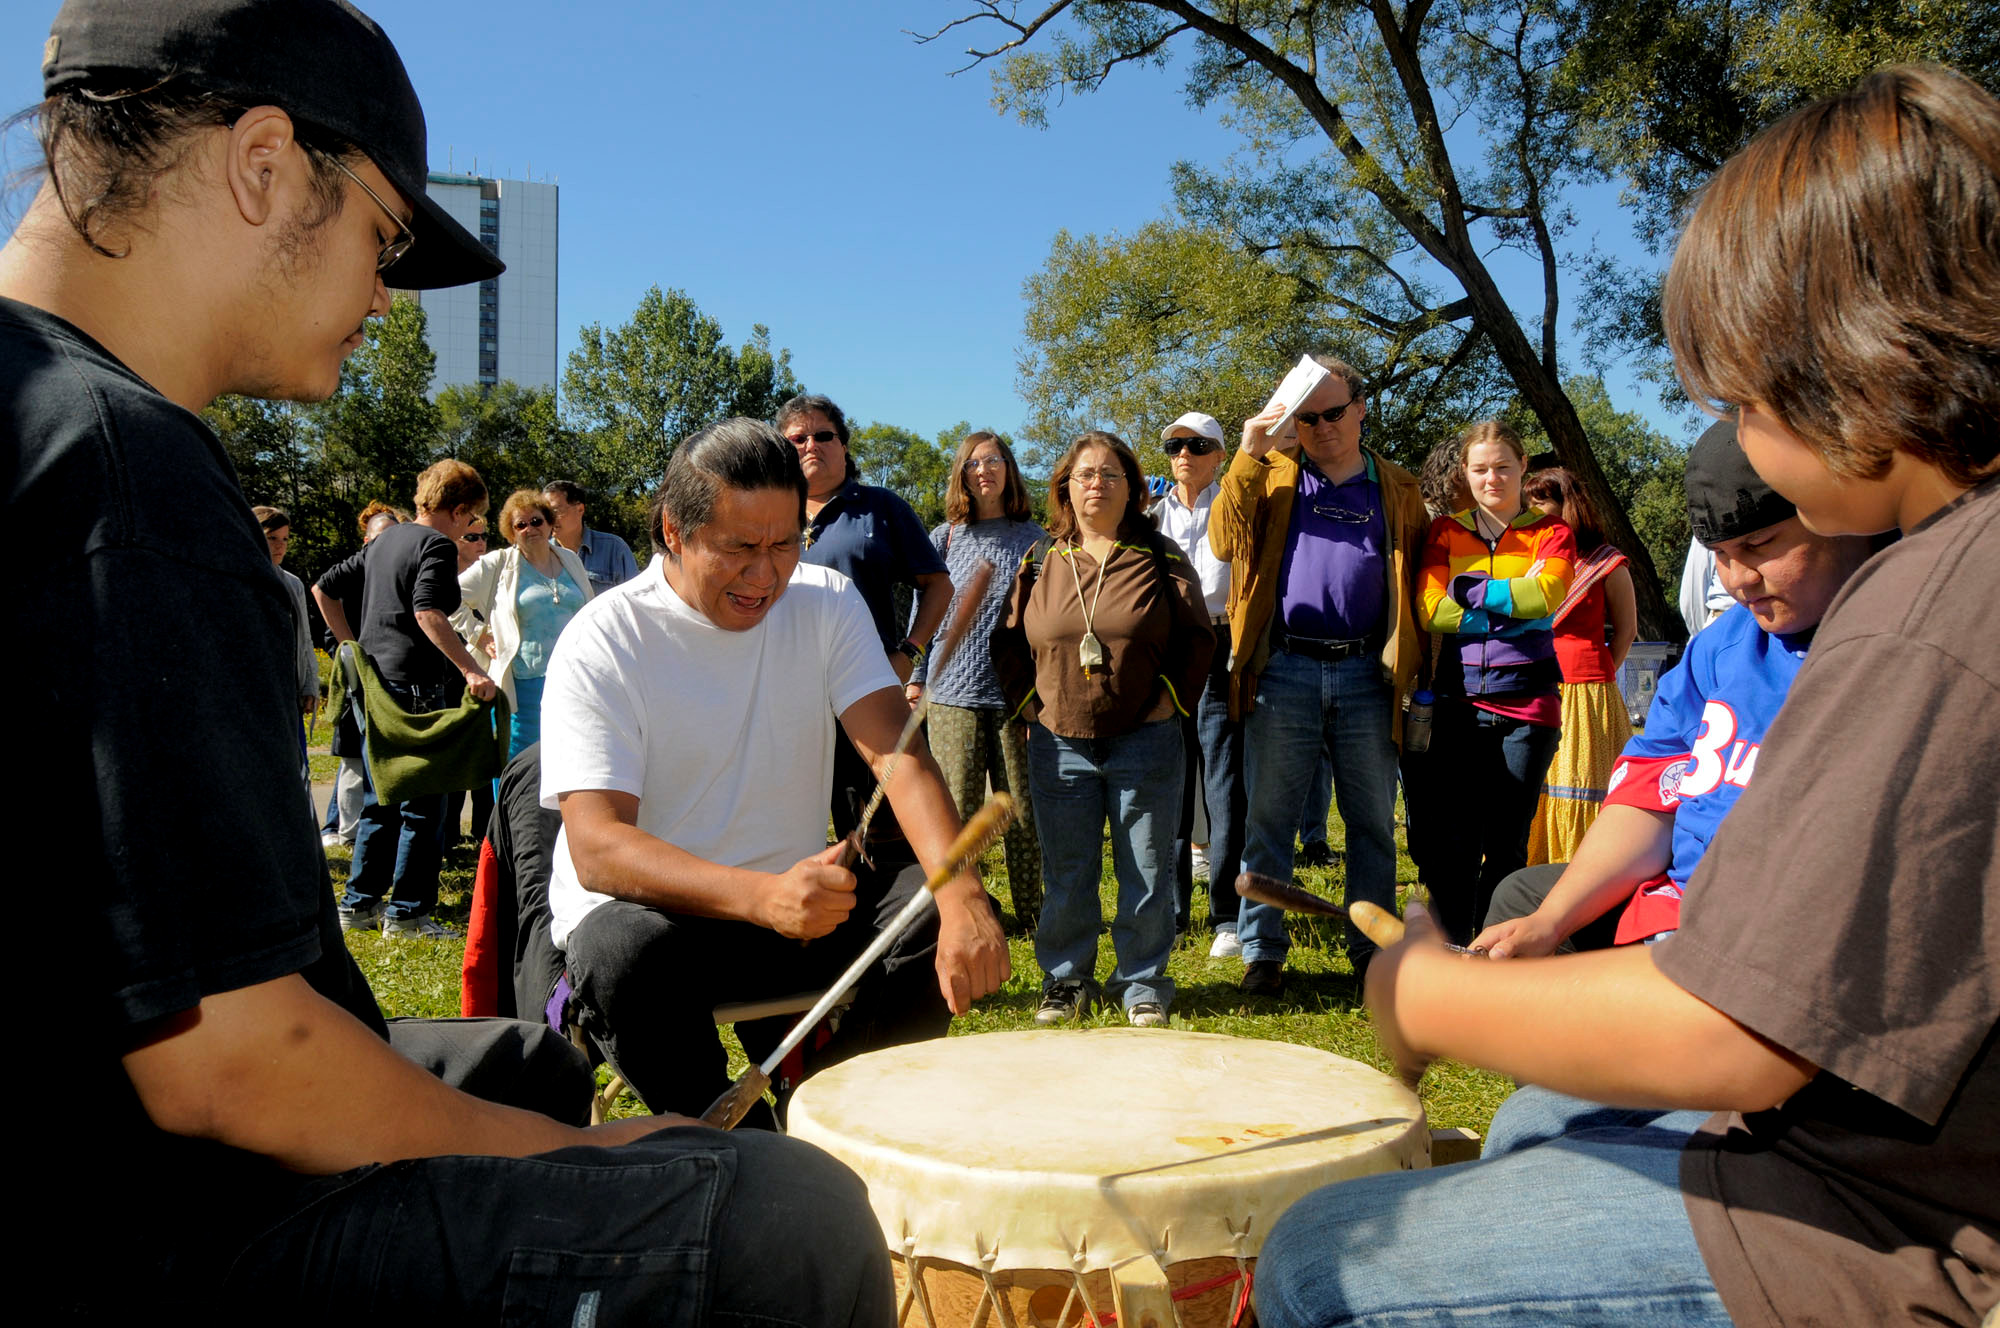 The Humber's Canadian Heritage River designation: 10th anniversary celebration with first nations drummers